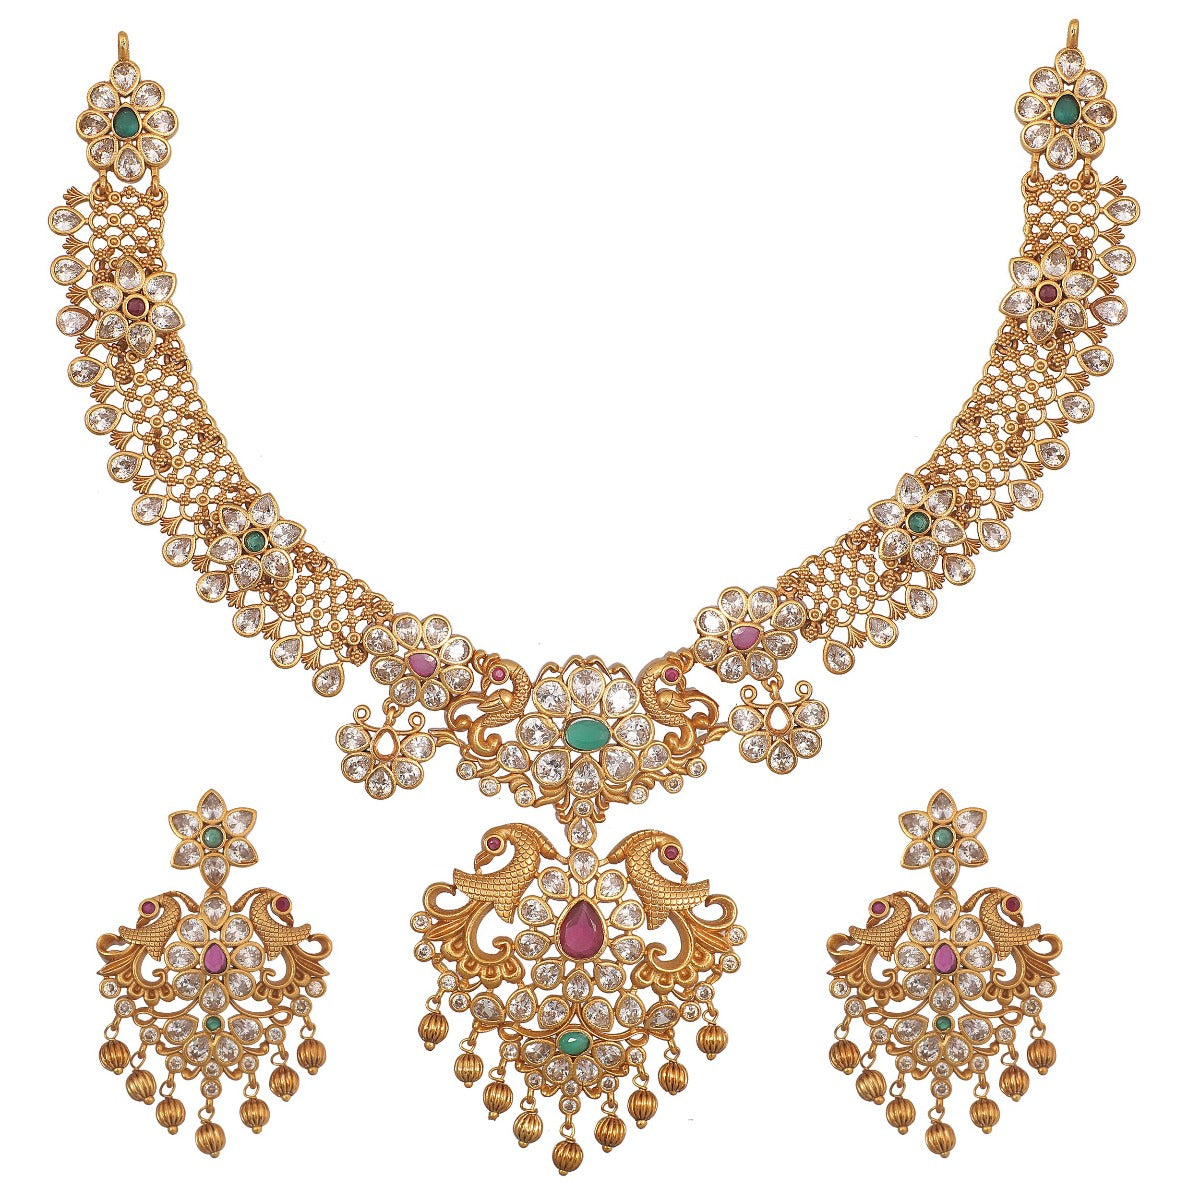 Antique Gold Plated Vira Necklace Earrings Set